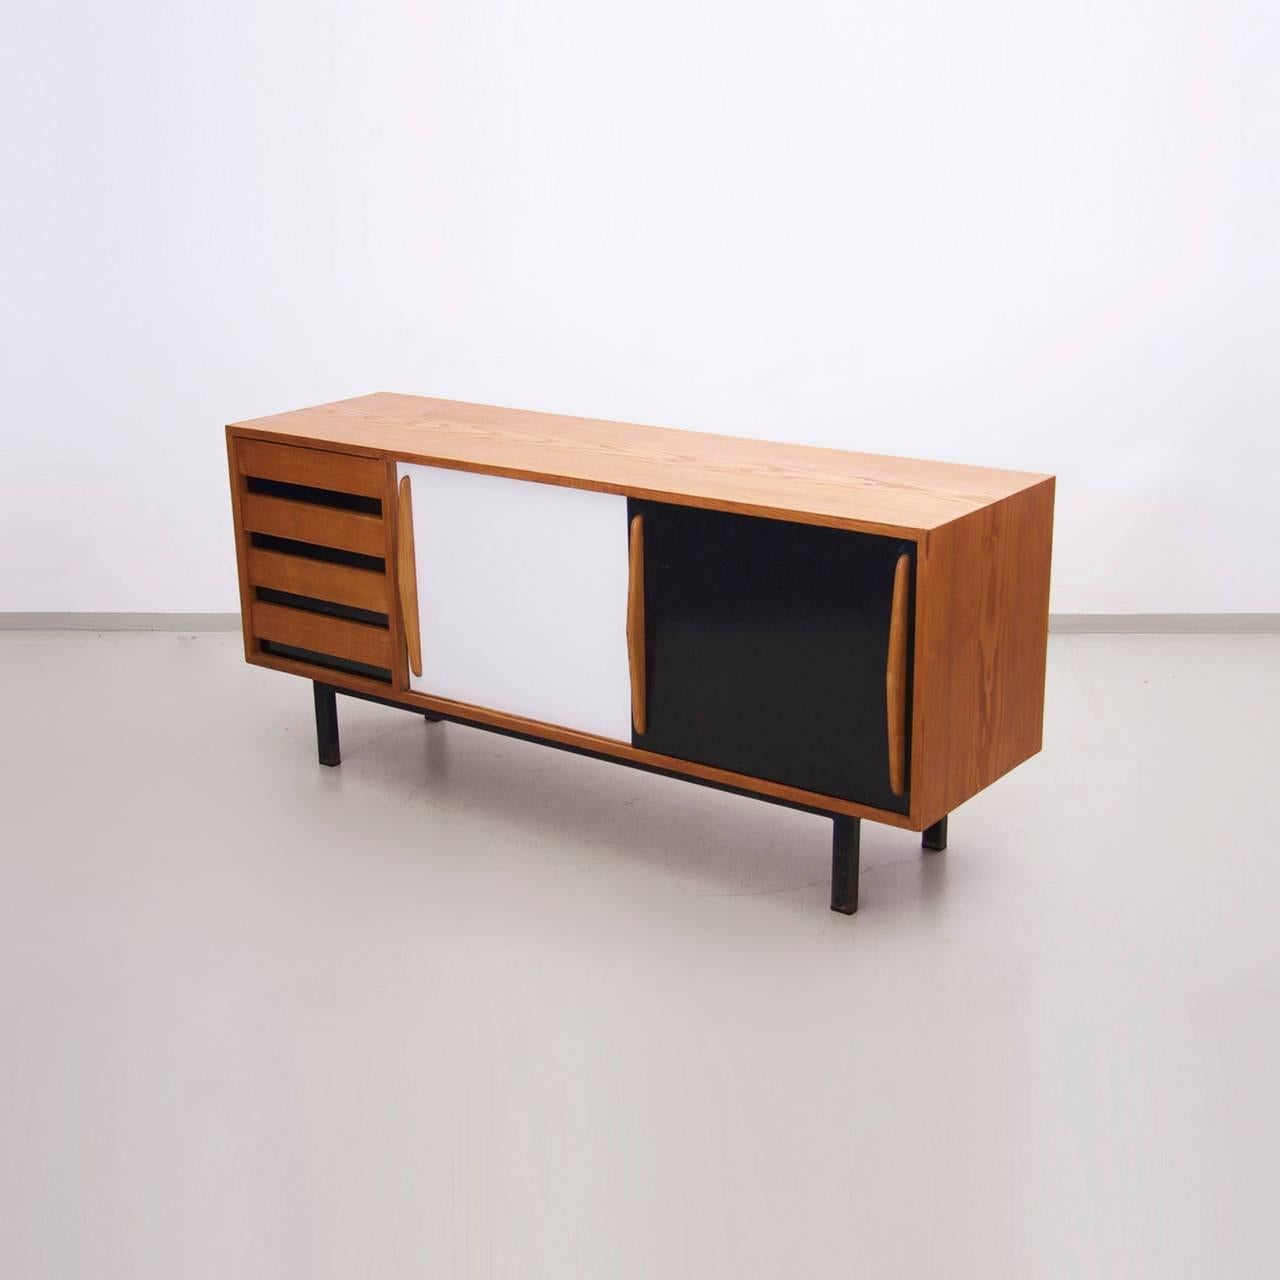 Charlotte Perriand cansado sideboard in mahogany, France, circa 1958 produced by Steph Simon, 1958 in a beautiful condition. 
From Guinea, Islamic Republic of Mauritania, Mali, Africa.